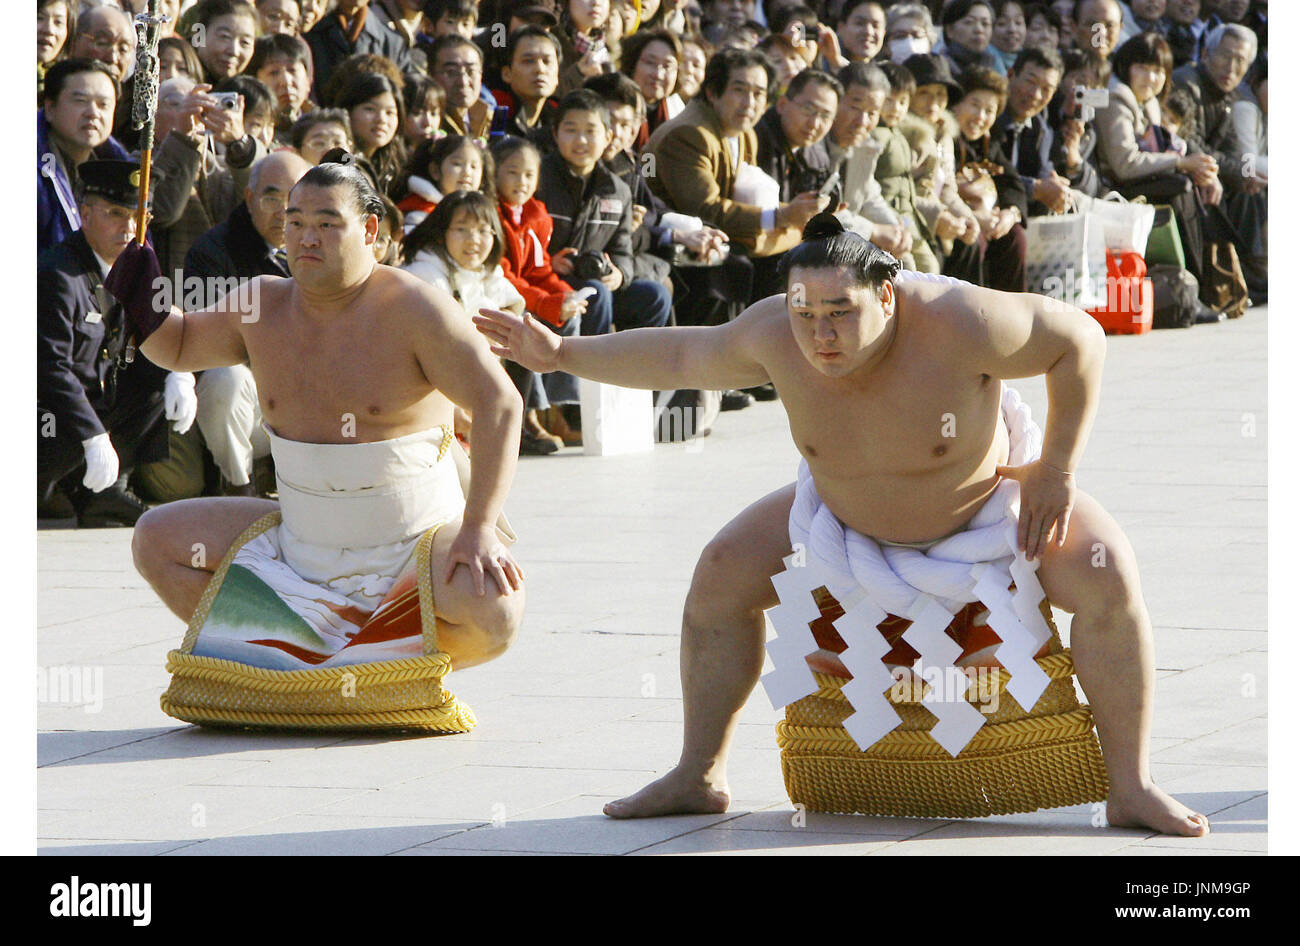 TOKYO, Japan - Mongolian Grand champion Asashoryu (R) performs the traditional dedicational sumo rites at Meiji Jingu shrine in Tokyo on Jan. 5. The event, which is held prior to the New Year Grand Sumo Tournament in Tokyo, attracted 4,500 spectators. Asashoryu is aiming for the fourth straight grand sumo title and the 20th career title -- the fifth wrestler in sumo history -- in the upcoming tournament. (Kyodo) Stock Photo